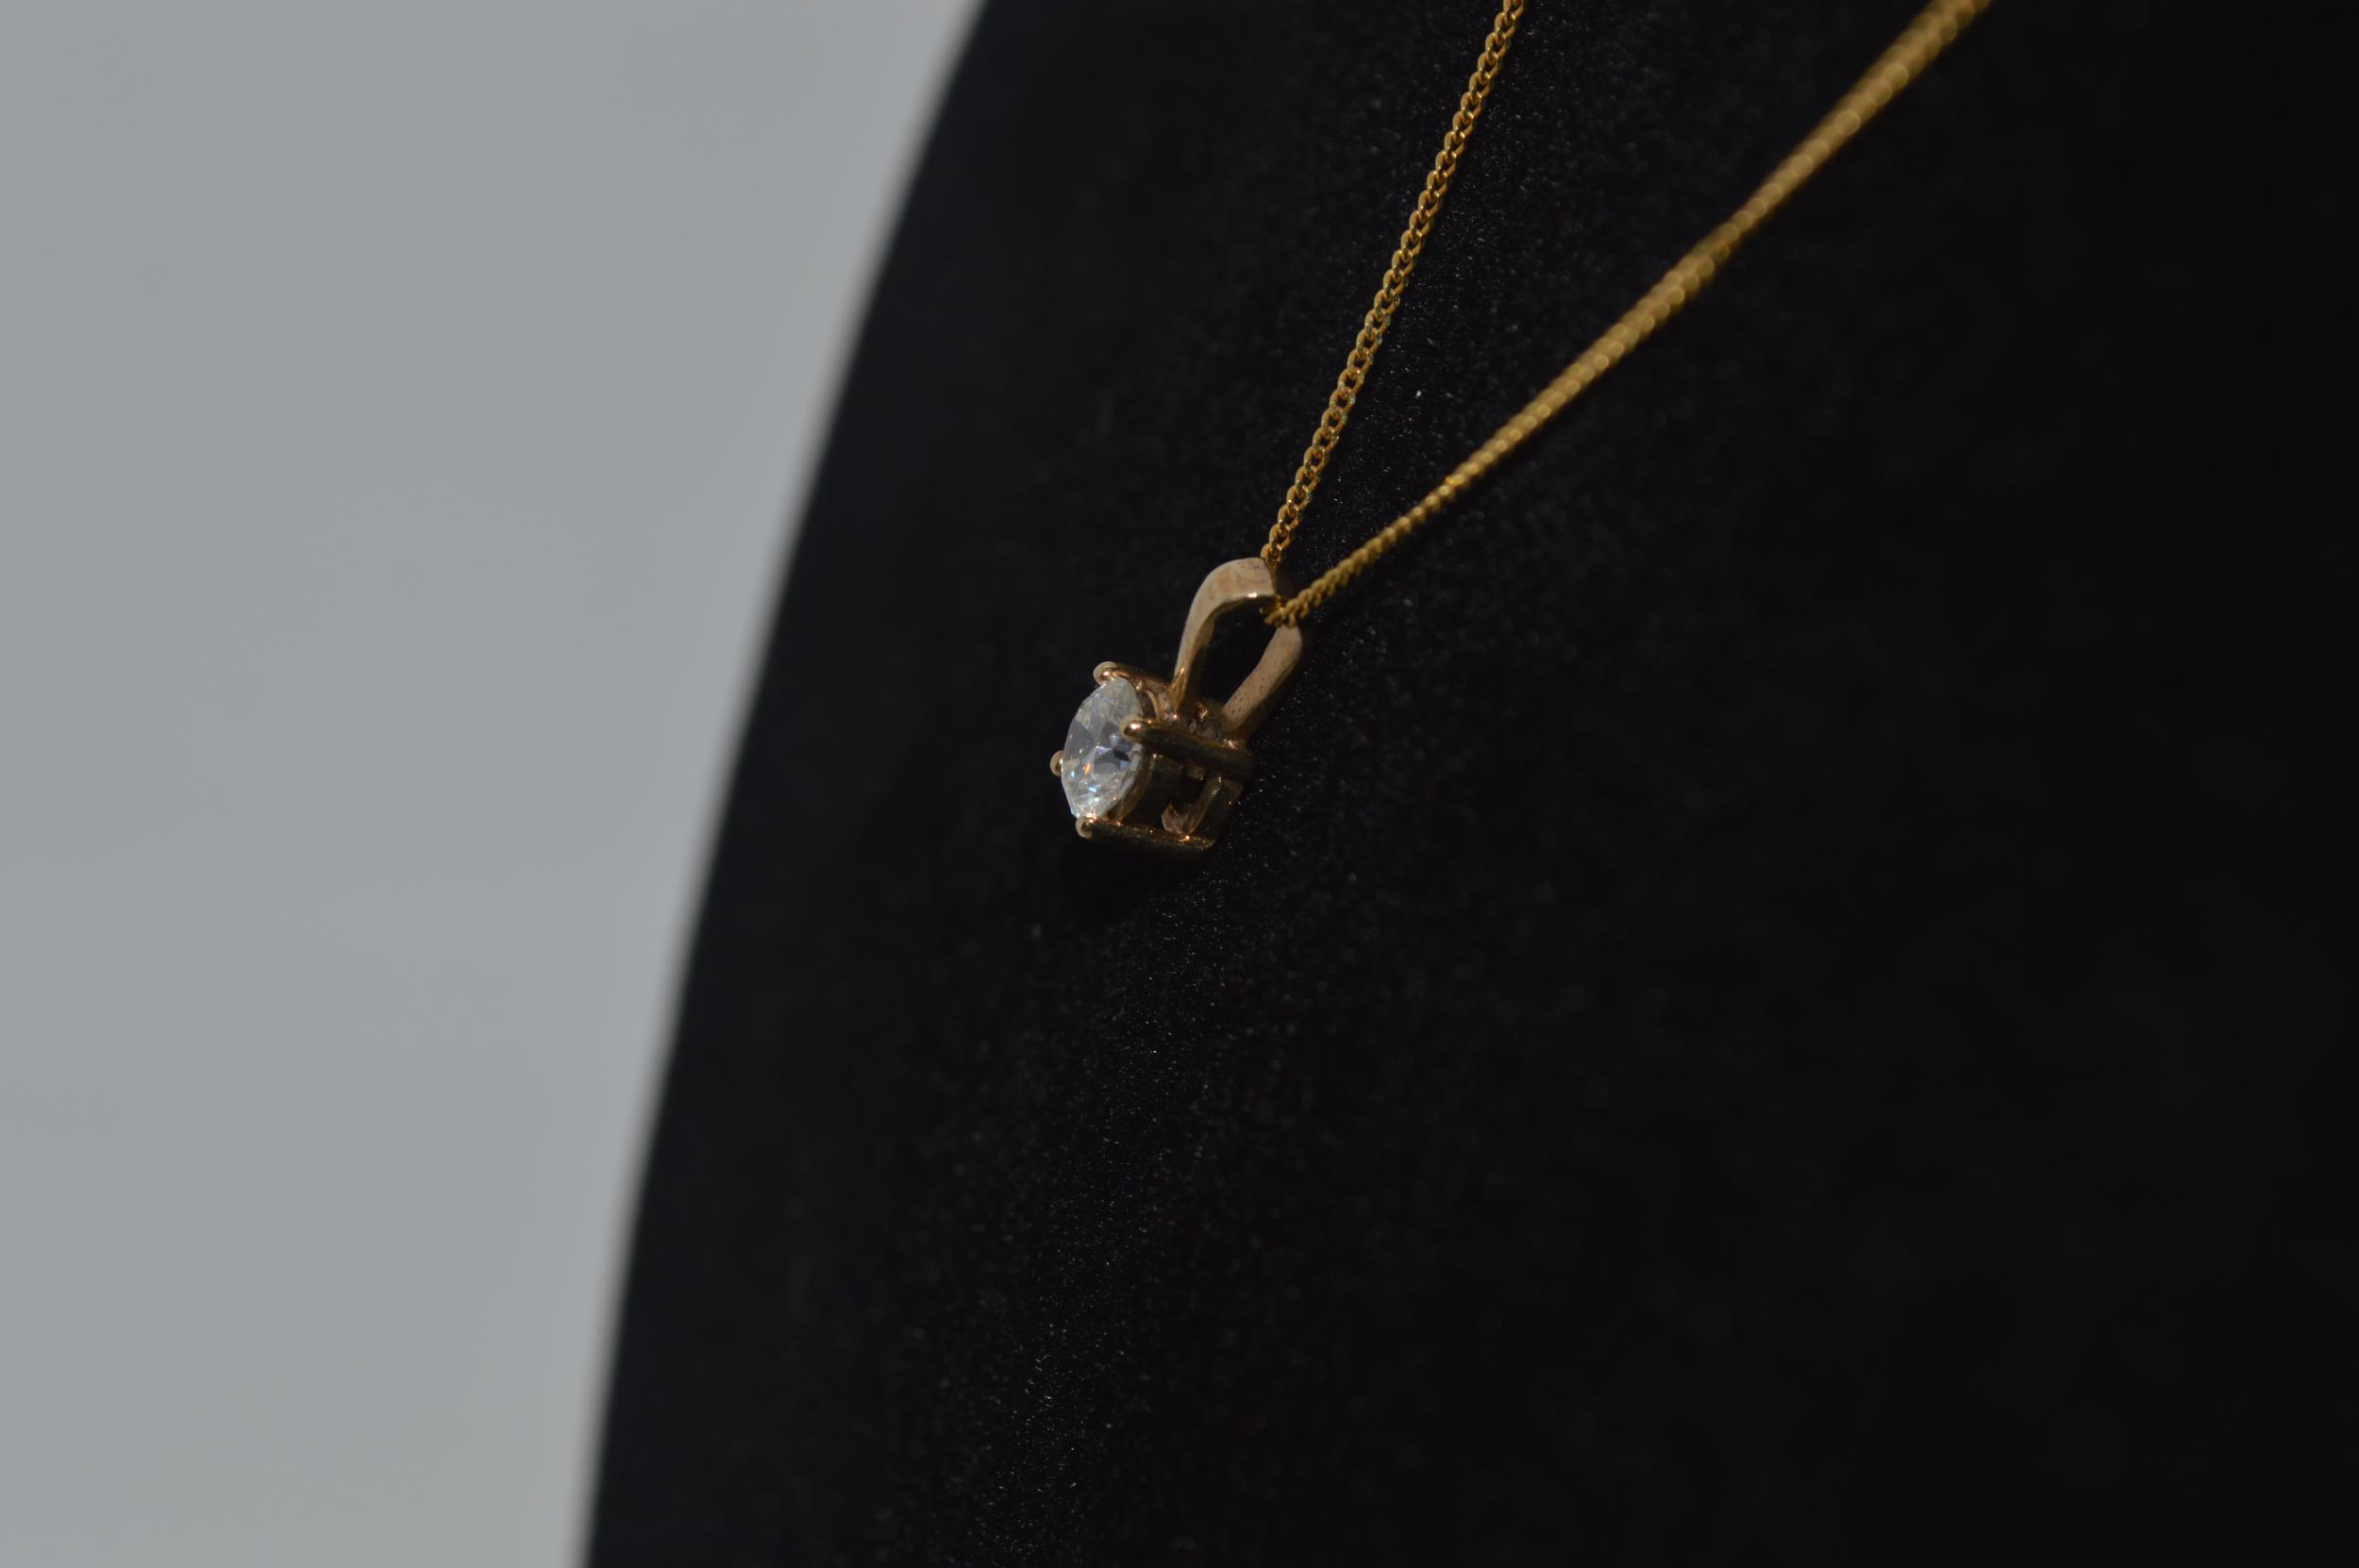 Yellow gold necklace with 0.33ct diamond solitaire pendant marked as 9ct gold